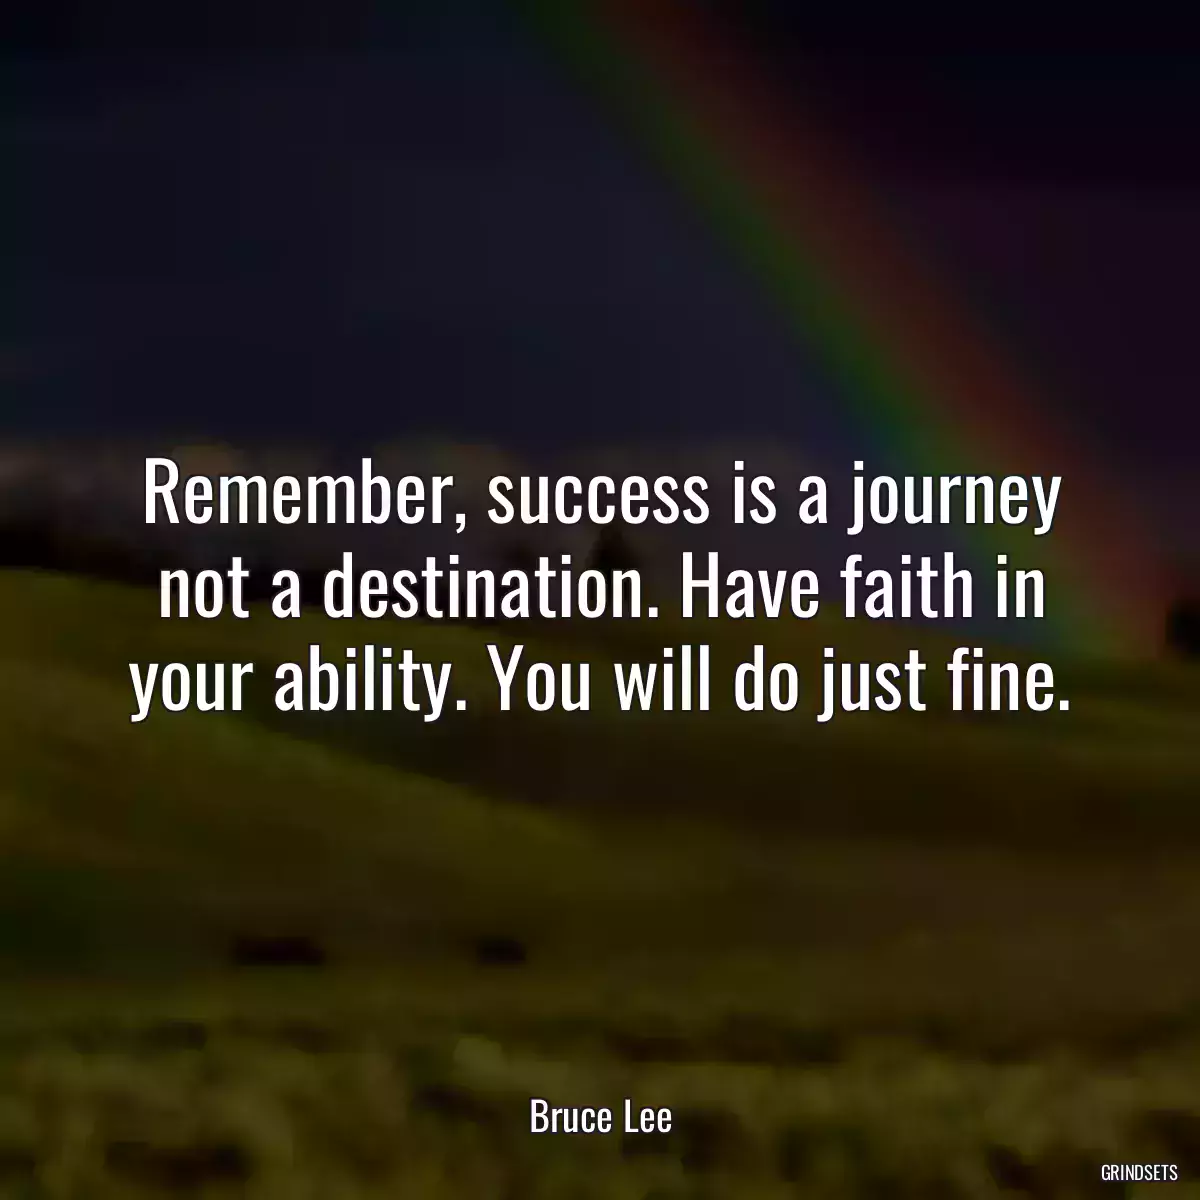 Remember, success is a journey not a destination. Have faith in your ability. You will do just fine.